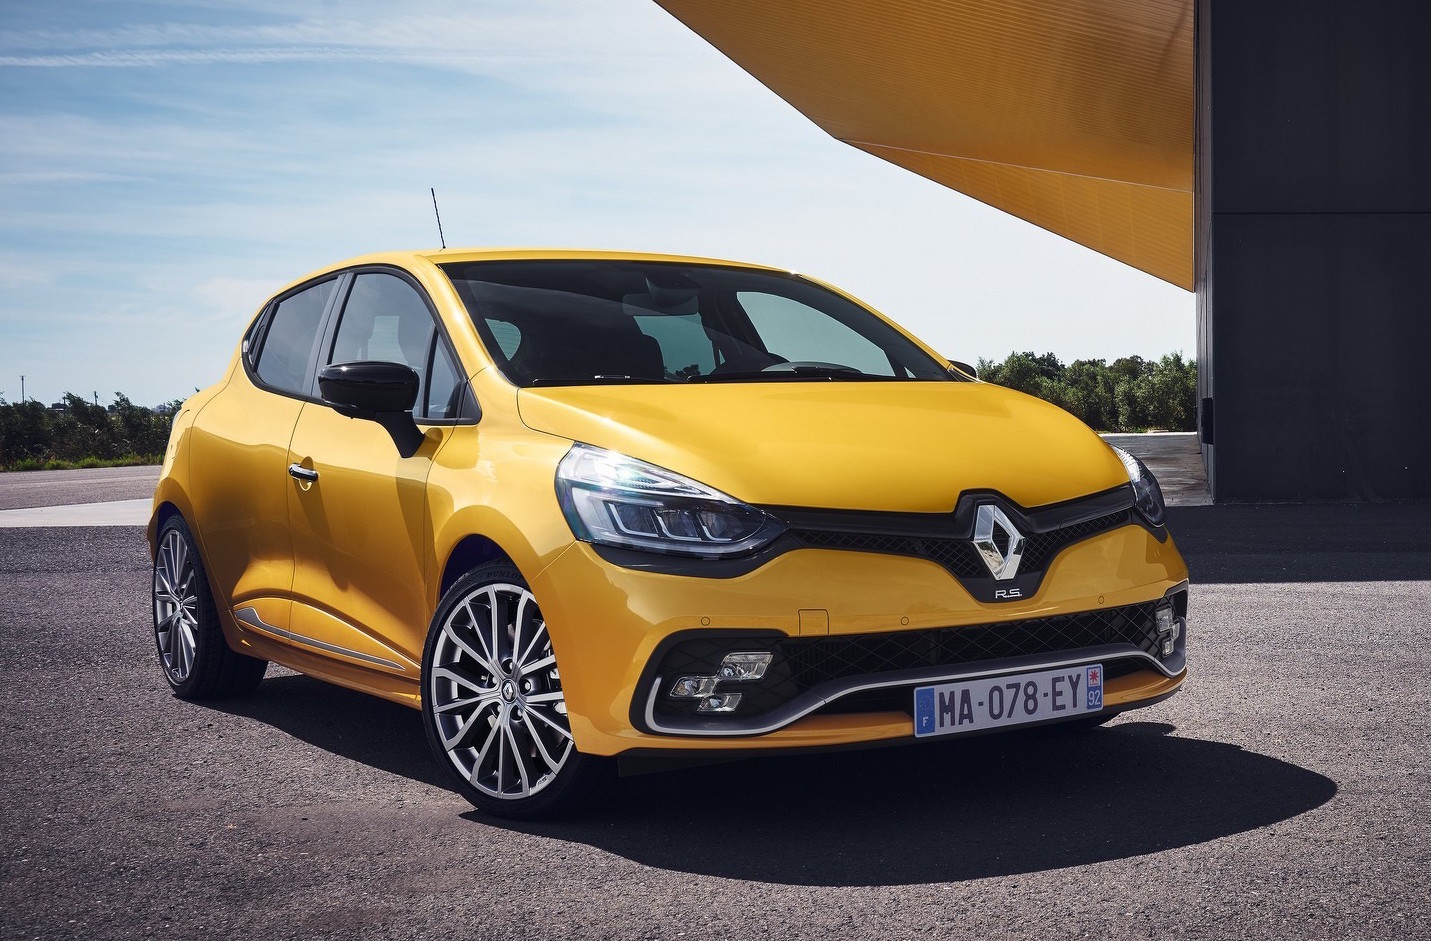 2017 Renault Clio R.S. unveiled with light facelift